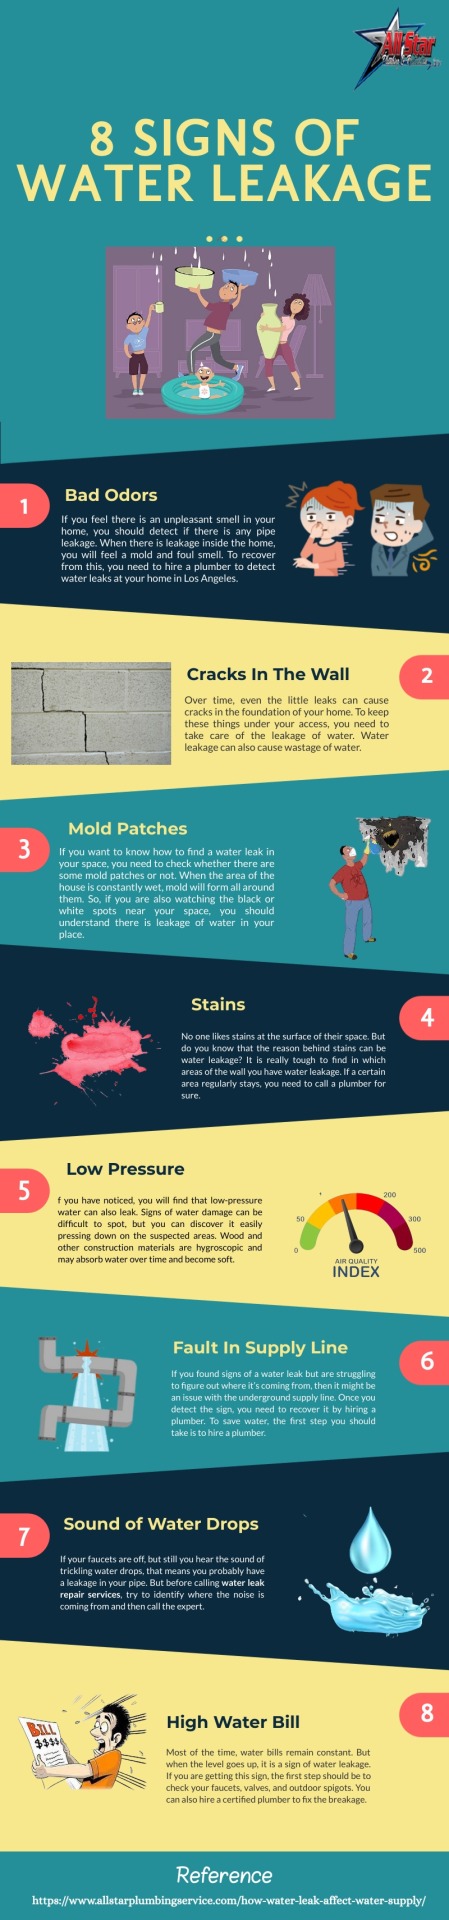 Top 8 Signs Of Water Leakage